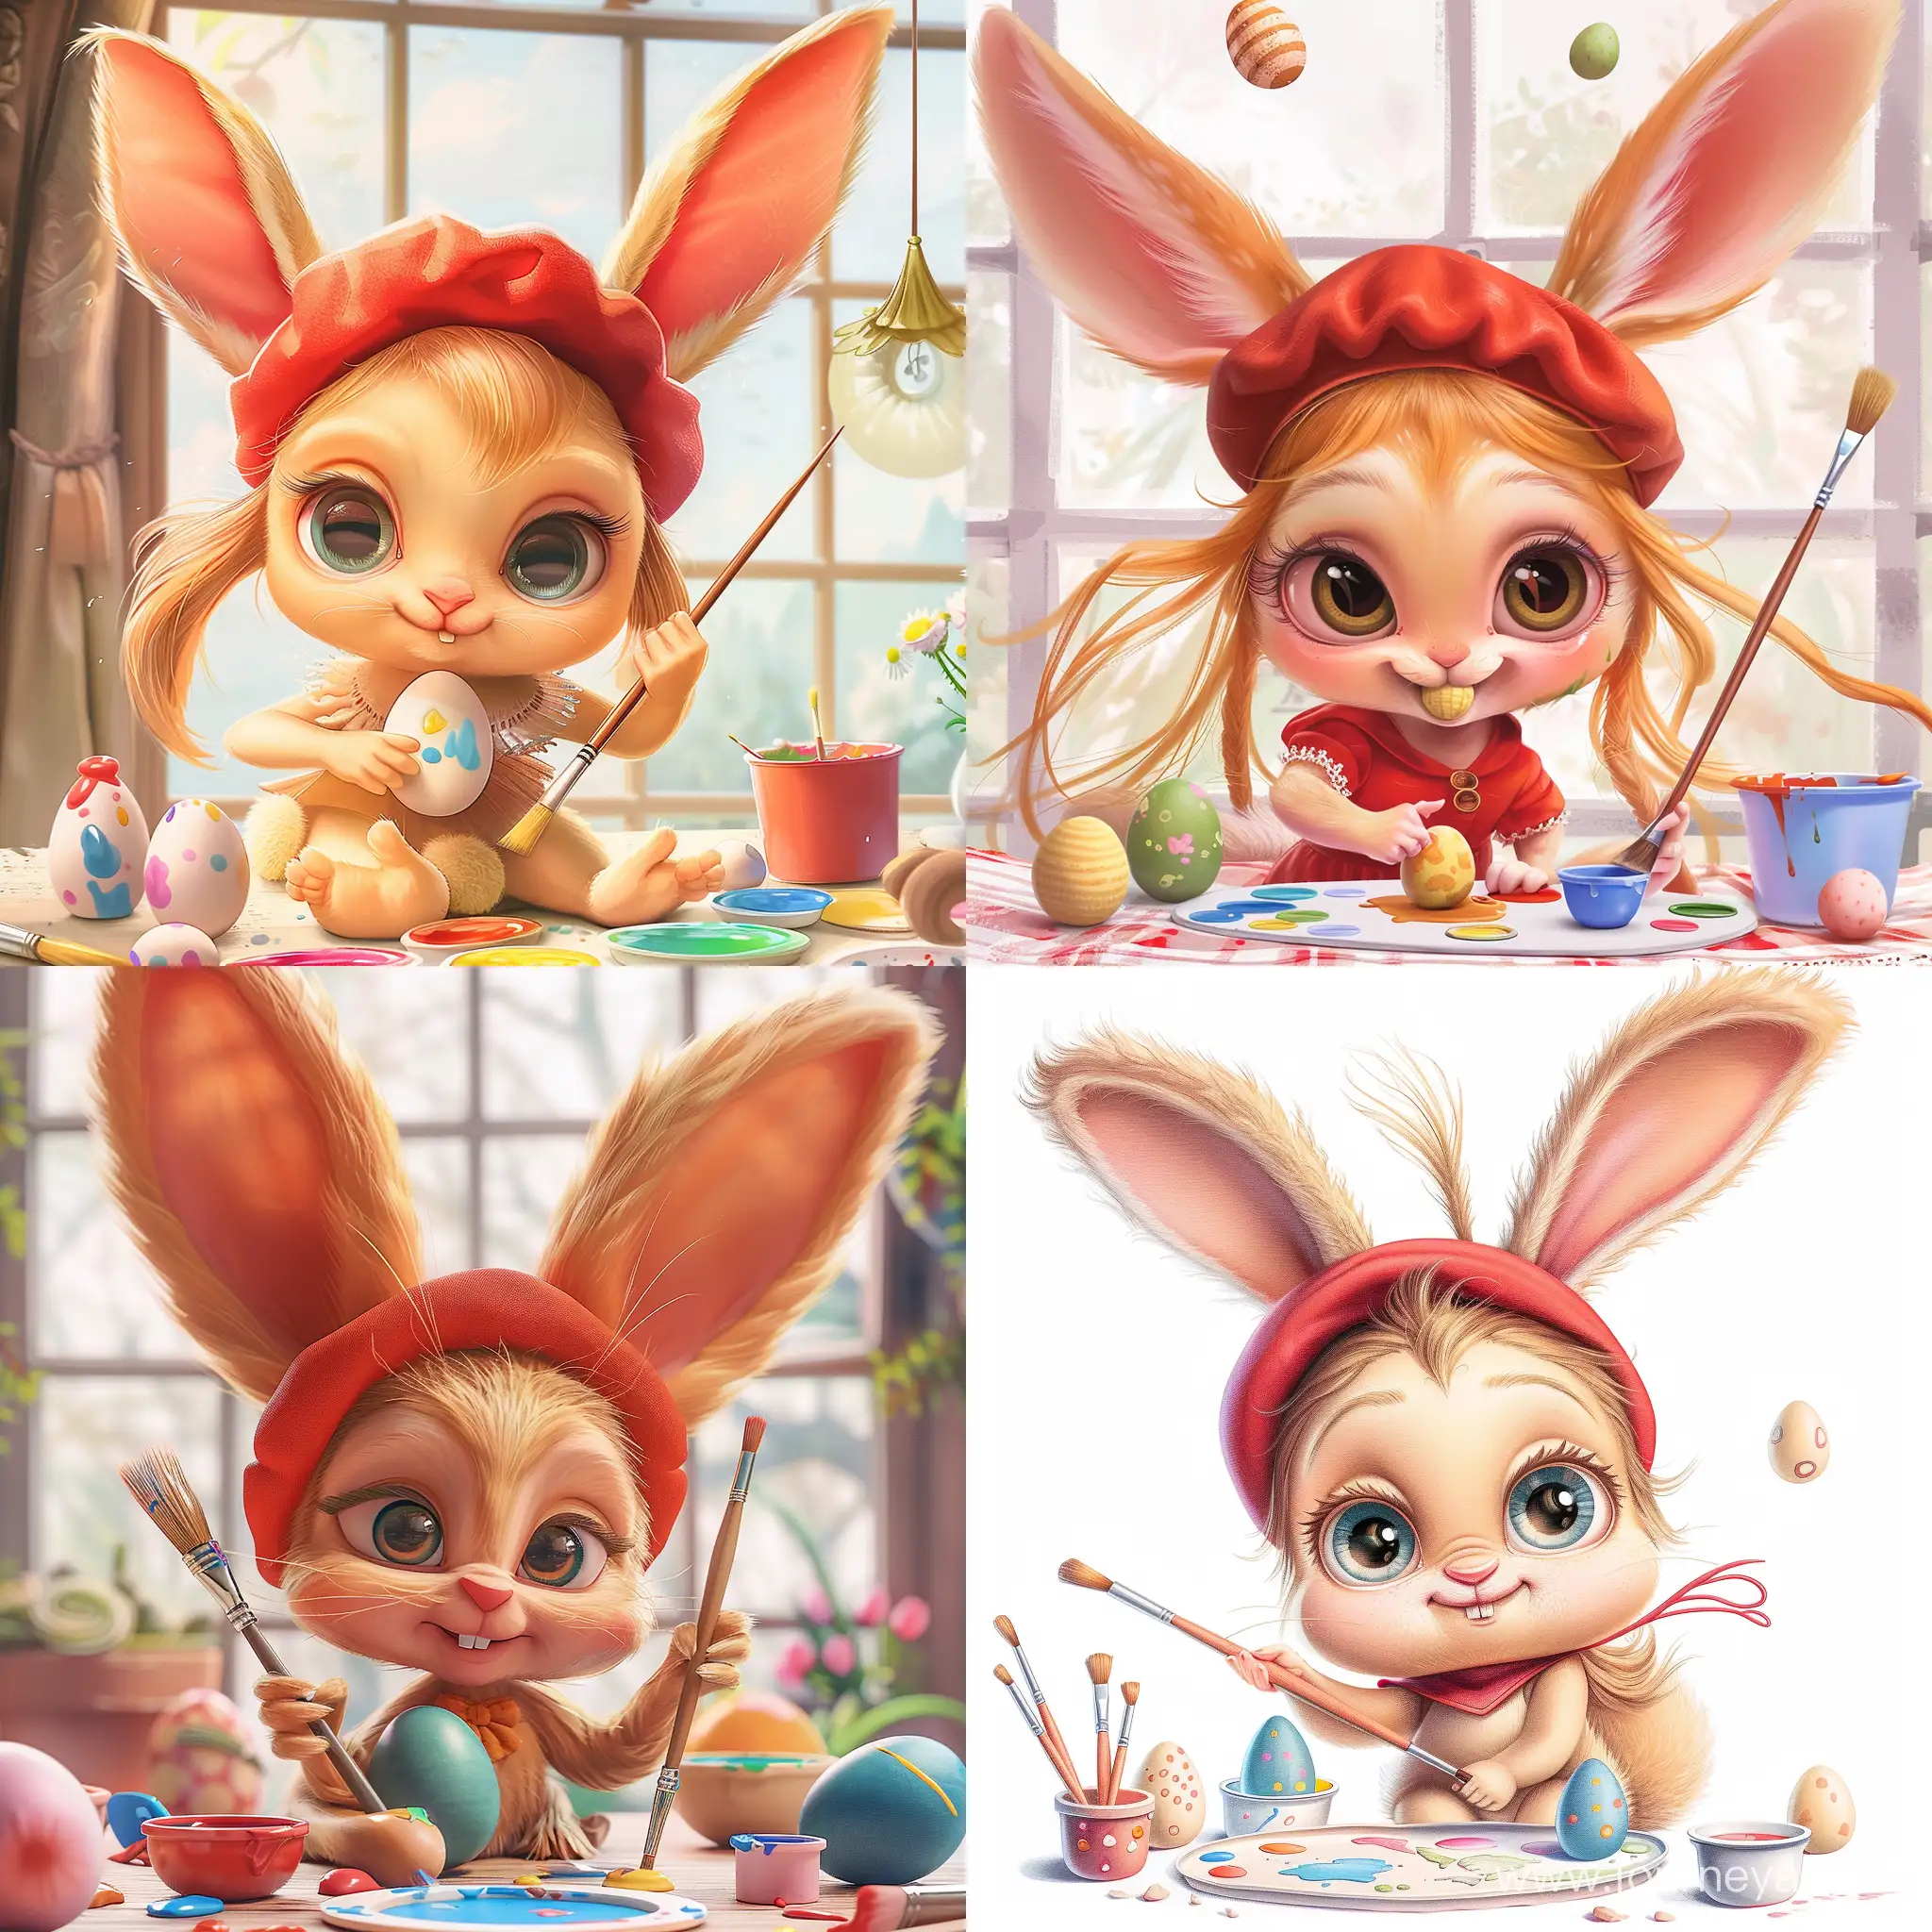 Adorable-Bunny-Princess-Painting-Easter-Eggs-in-Disney-Style